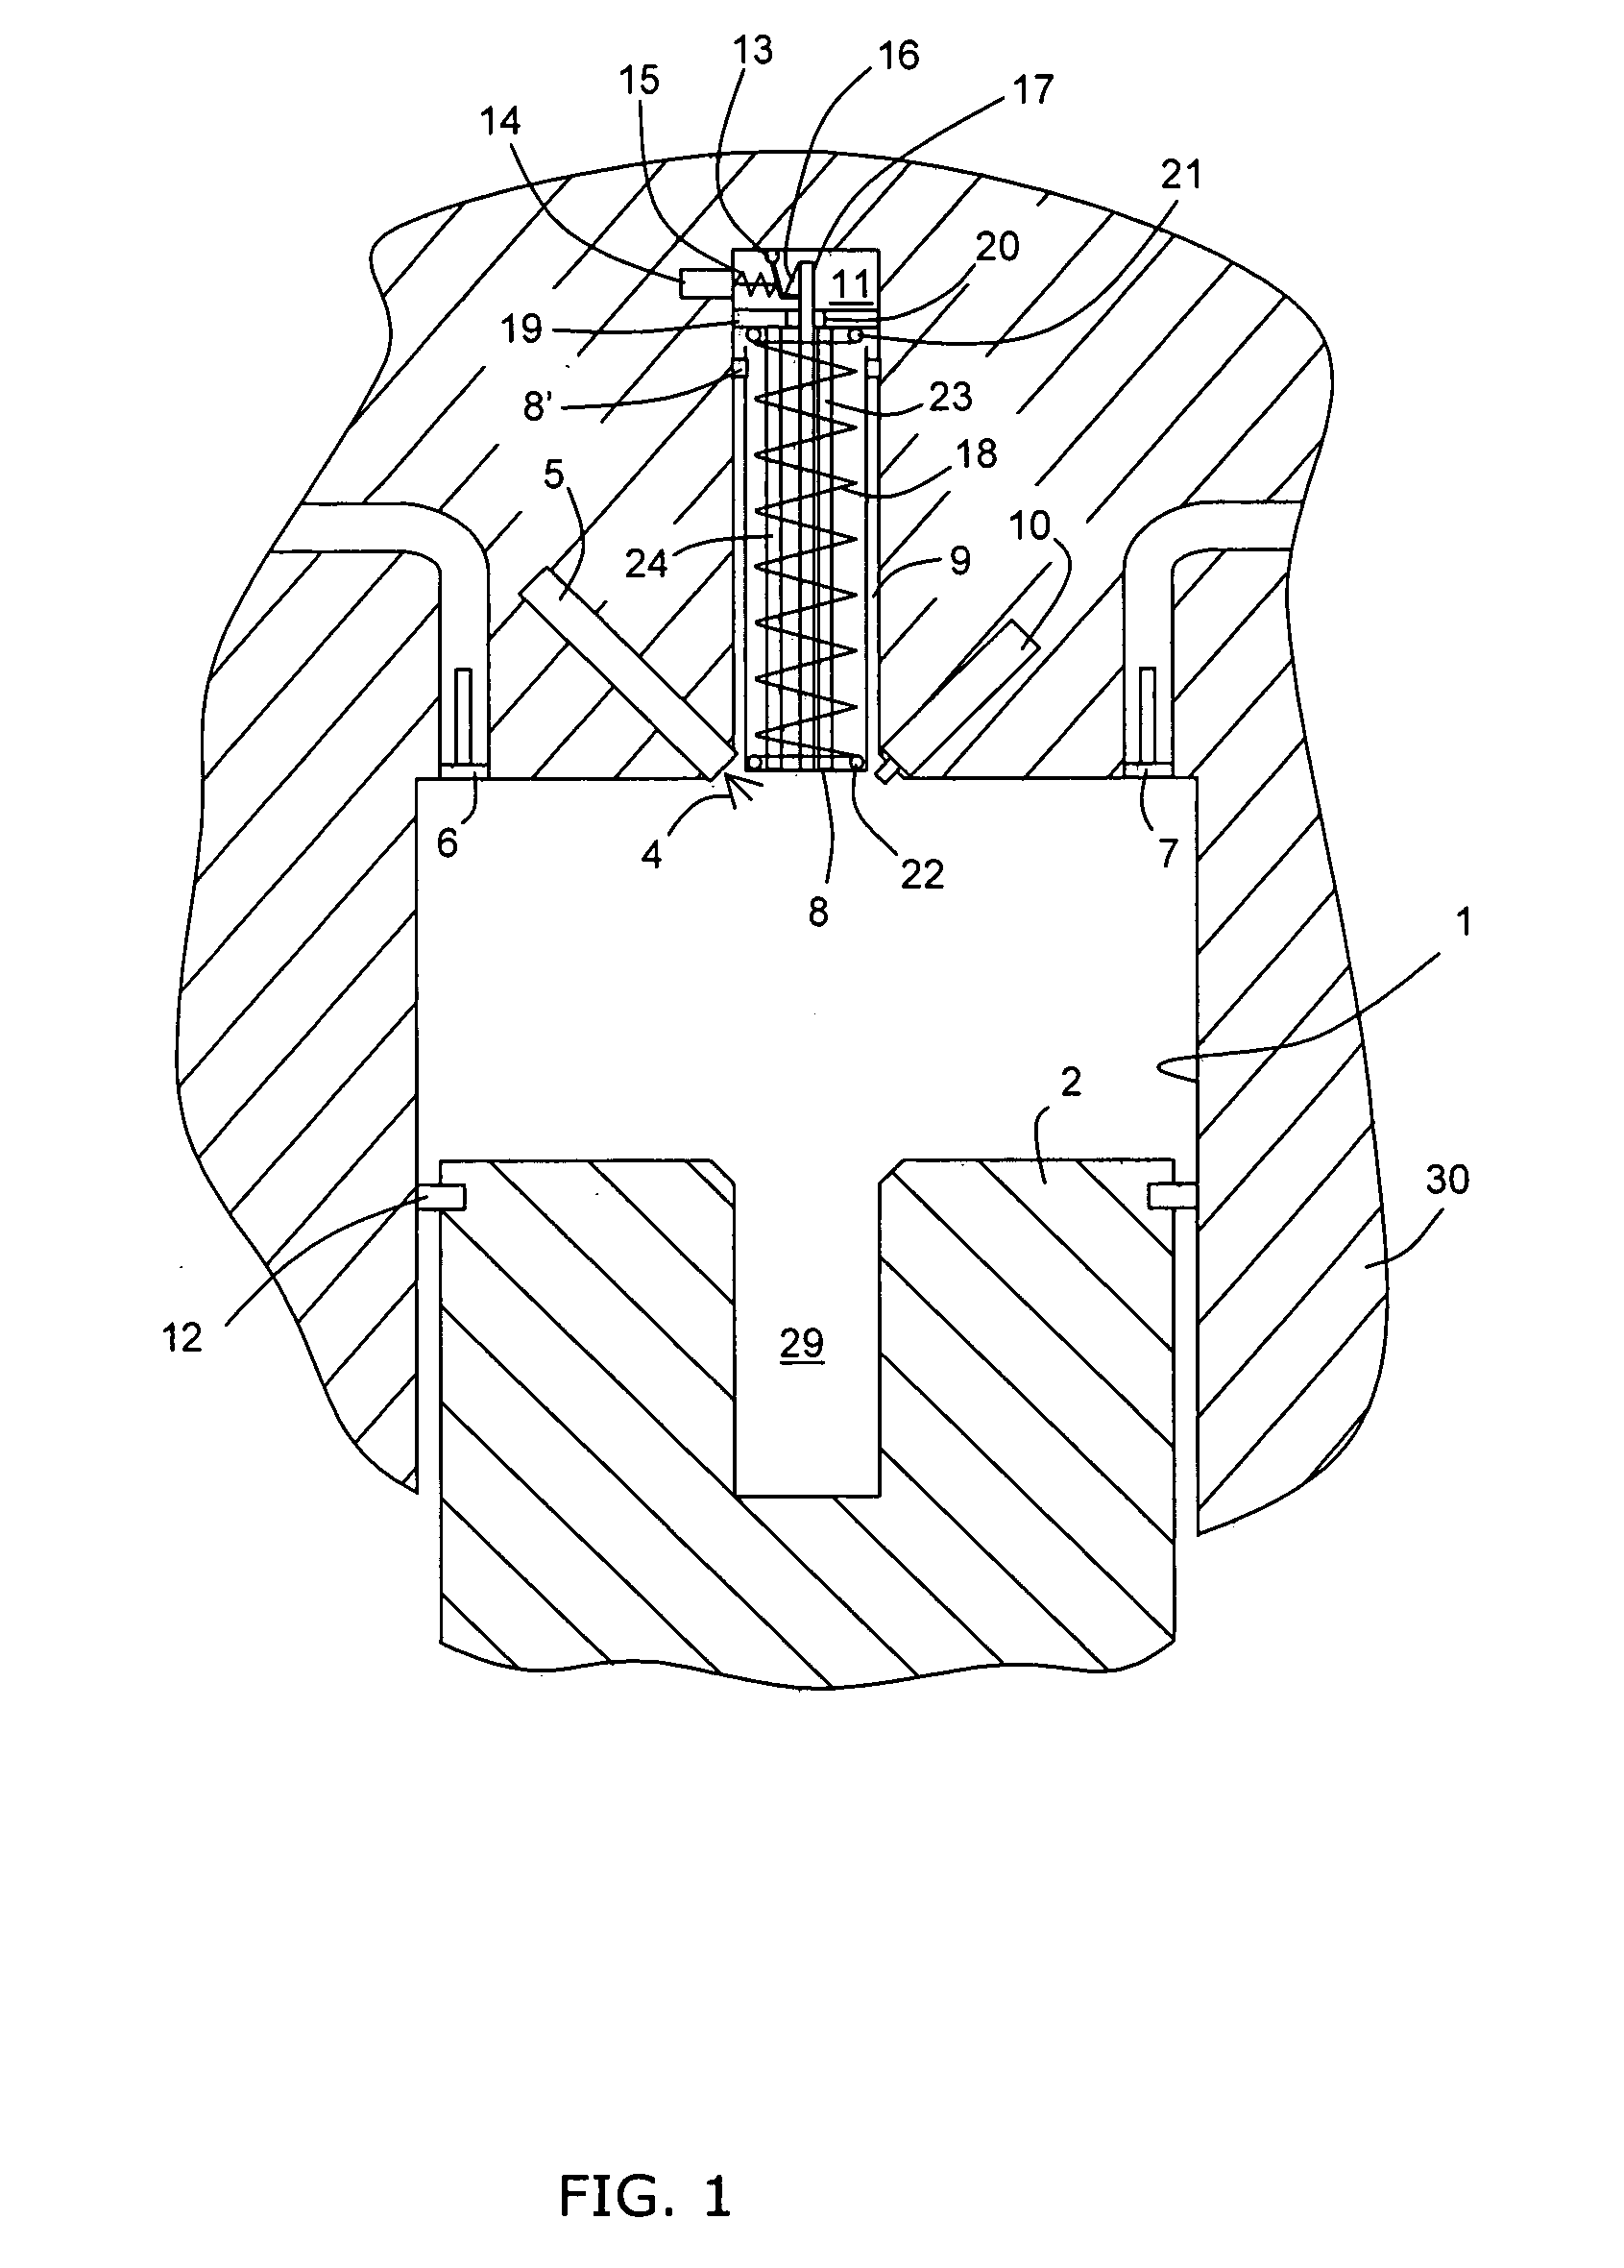 Homogeneous charge compression ignition engine and method of operating